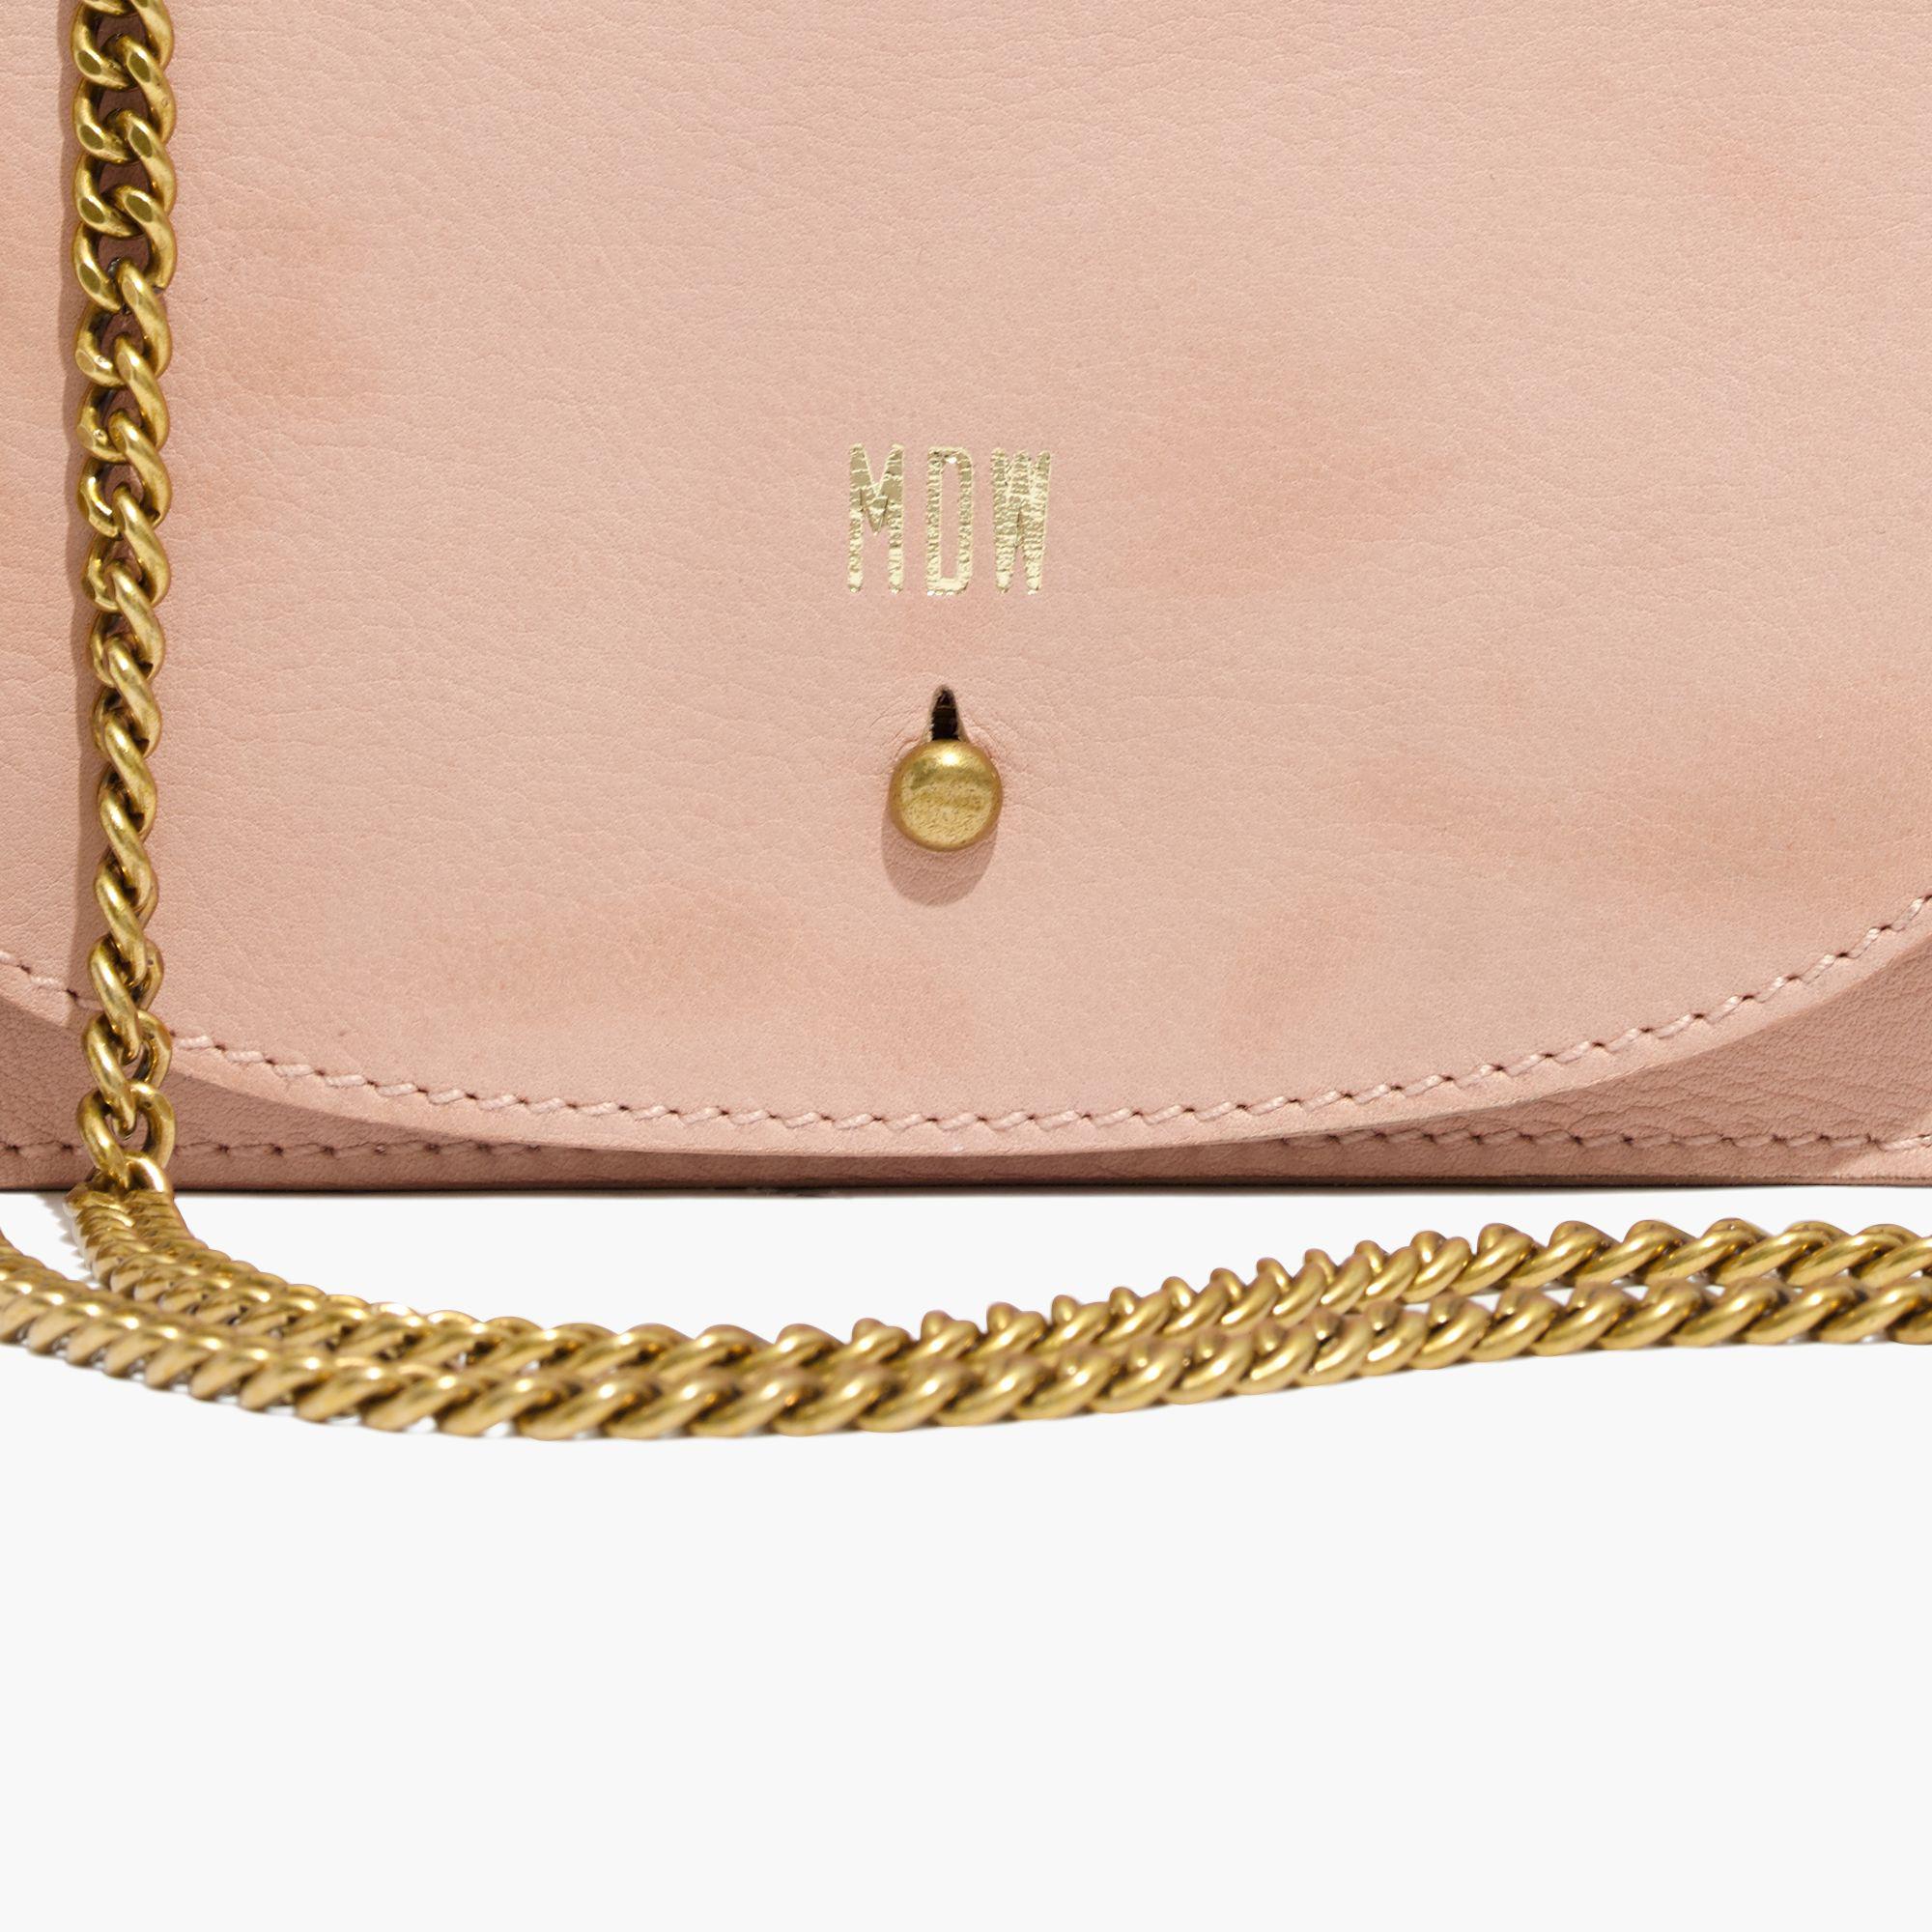 Madewell Leather The Chain Crossbody Bag in Pink - Lyst